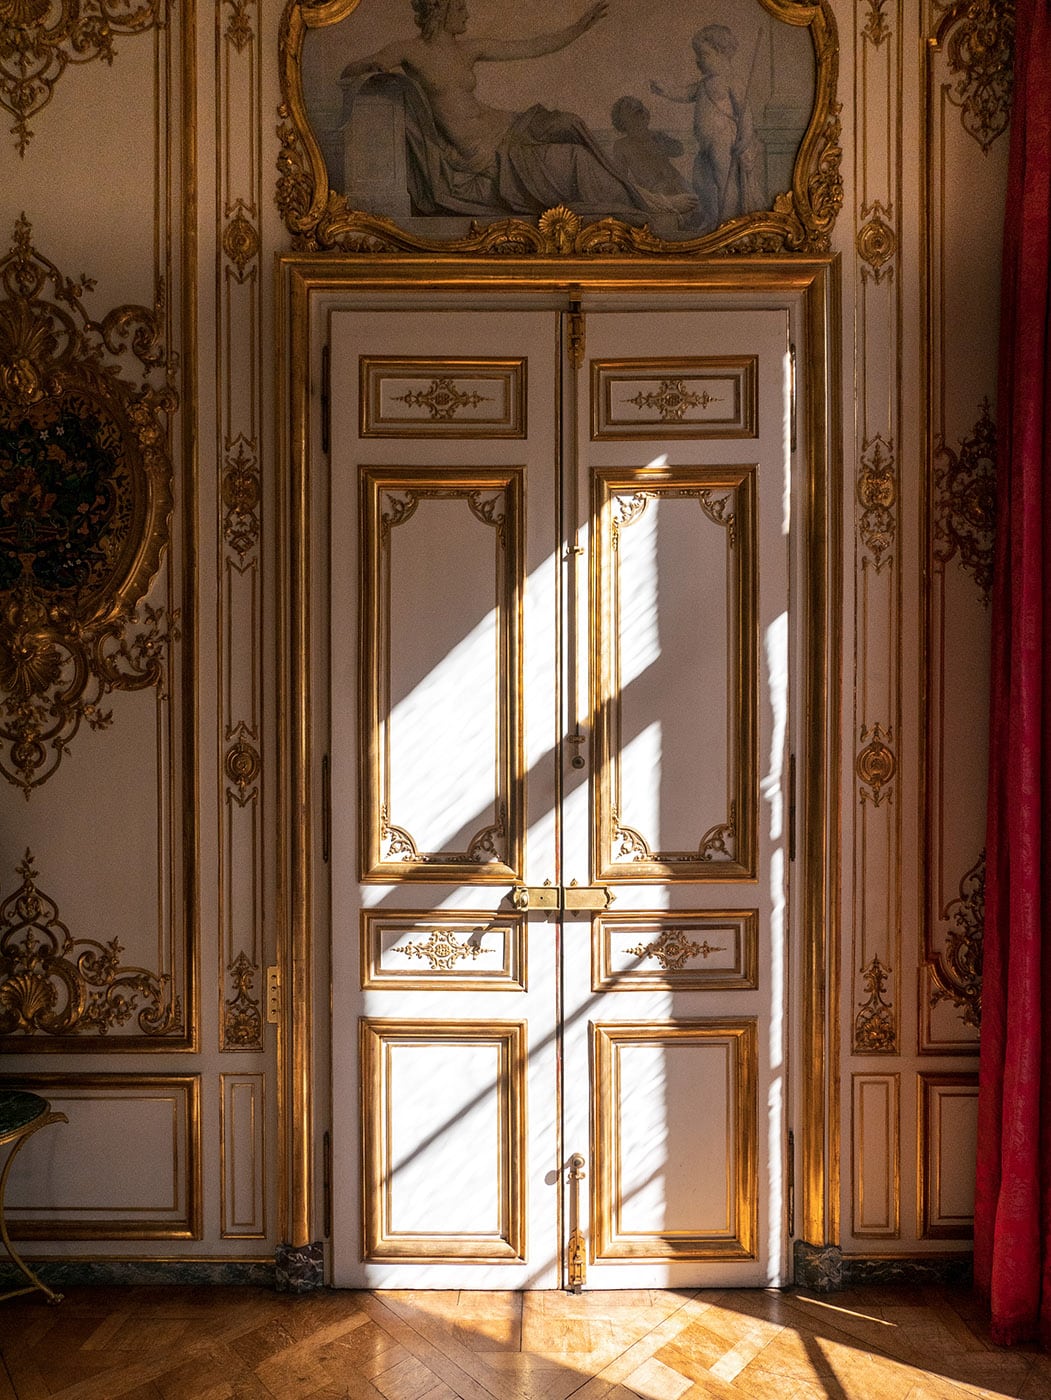 What does the Hôtel de Matignon, the residence of the French Prime Minister, look like? 14